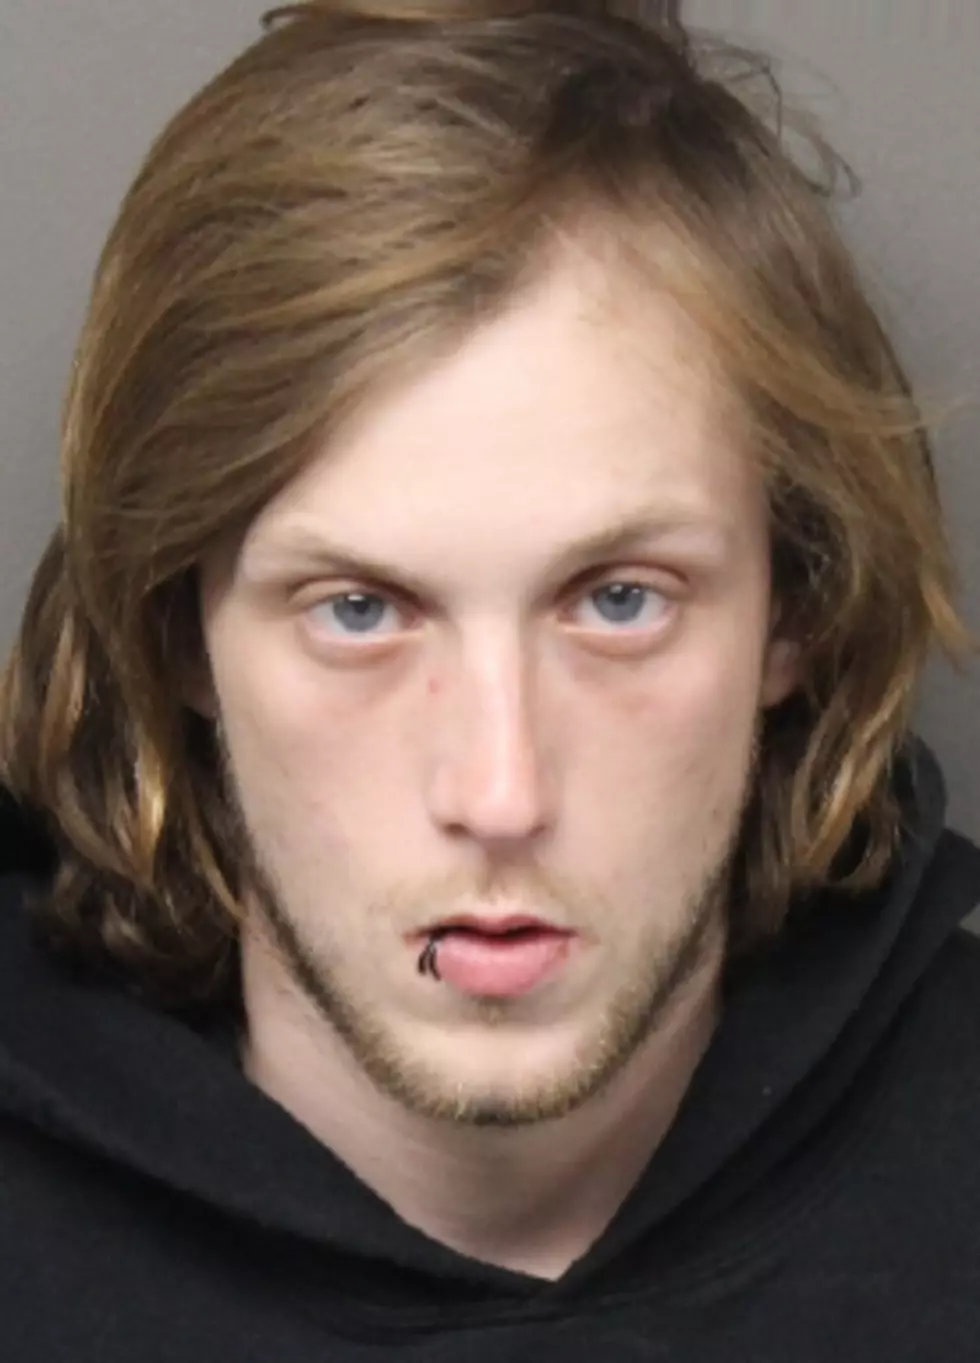 Berkeley man pleads guilty to dealing lethal dose of heroin that killed two residents